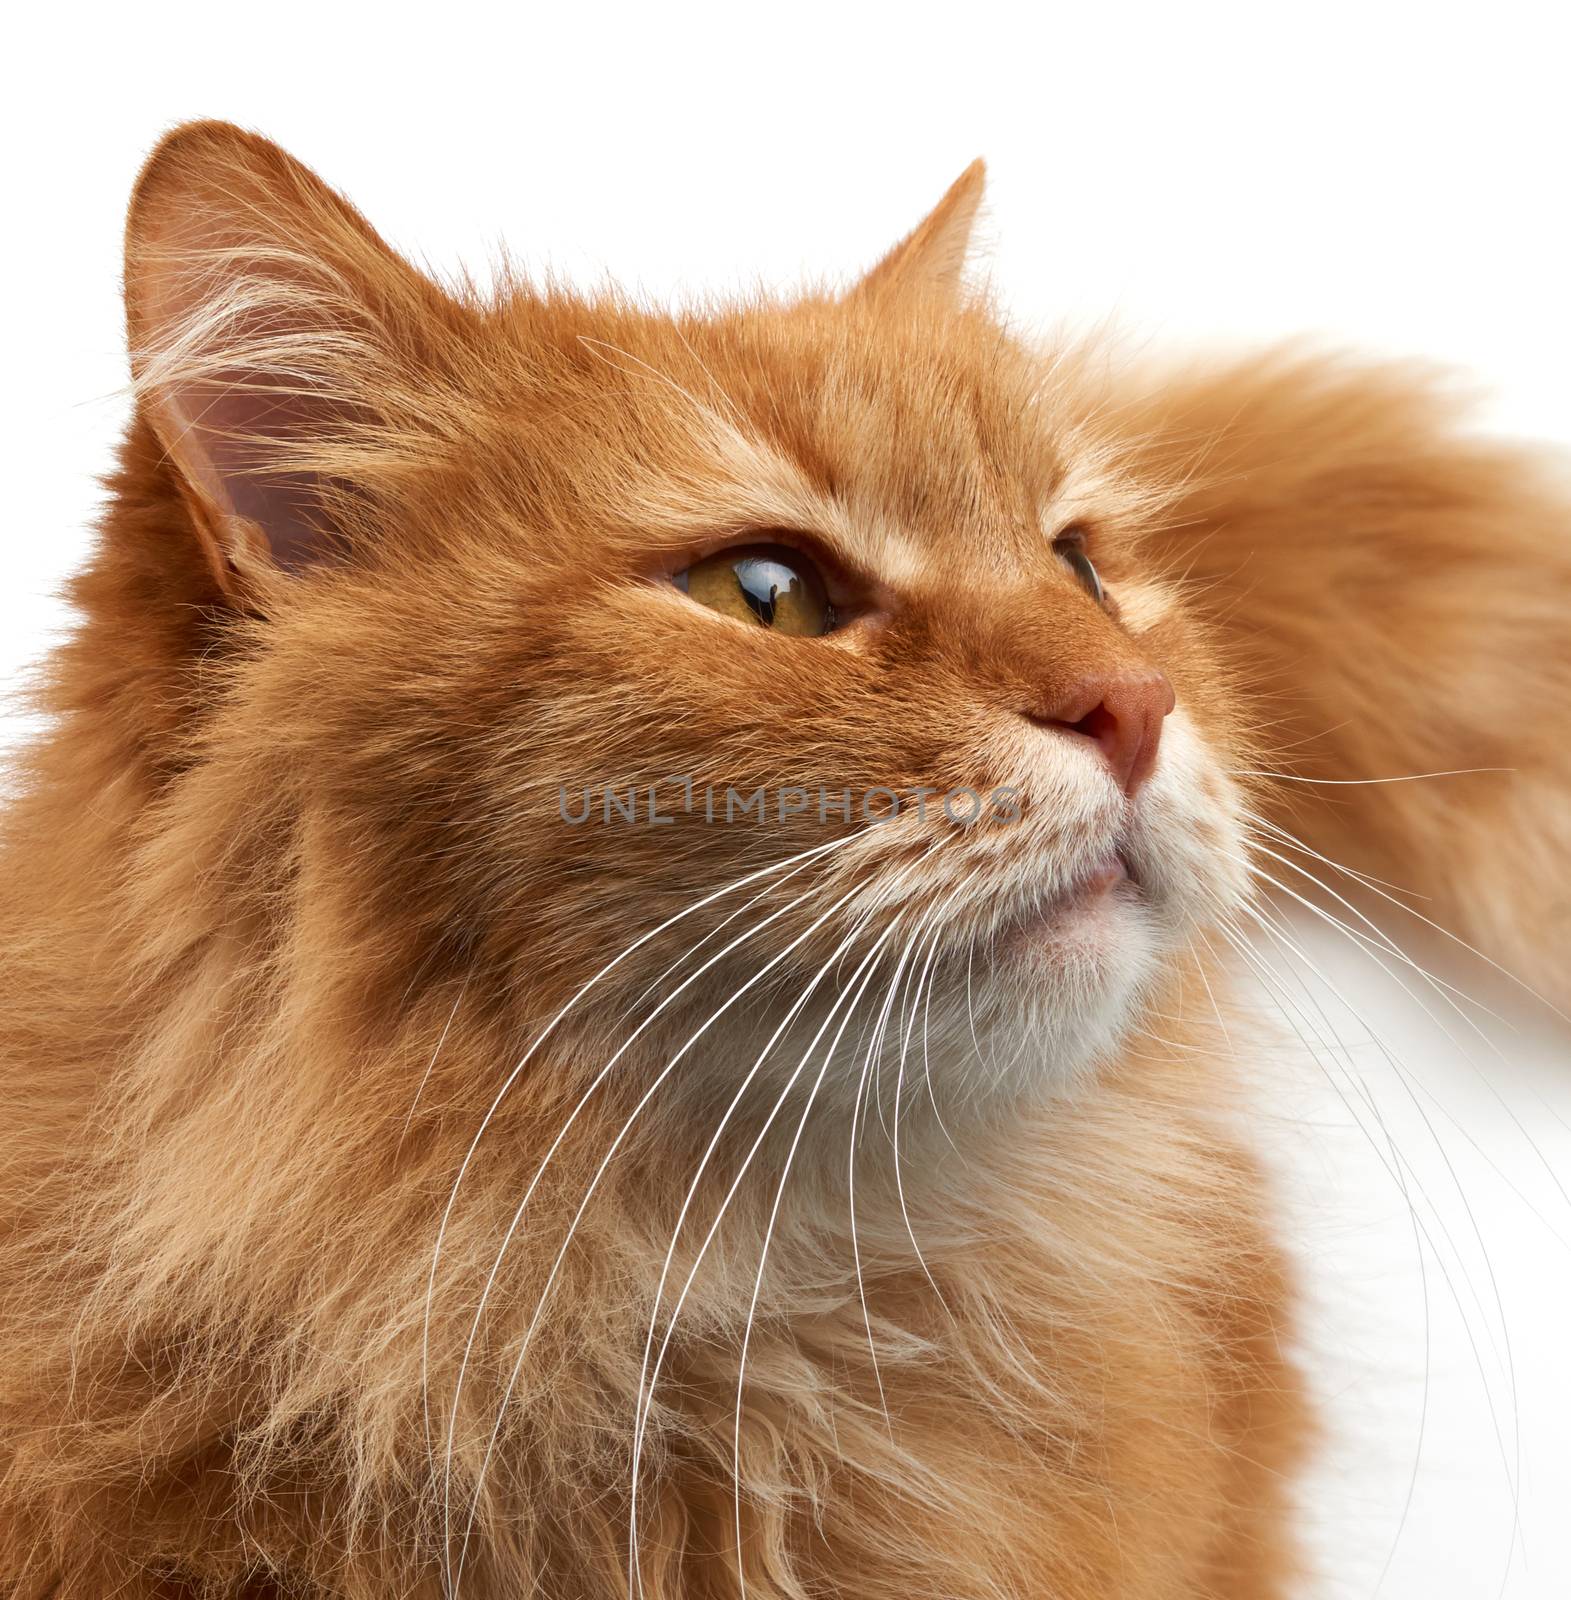 muzzle adult large fluffy red ginger domestic cat sits sideways on a white background, the animal looks away